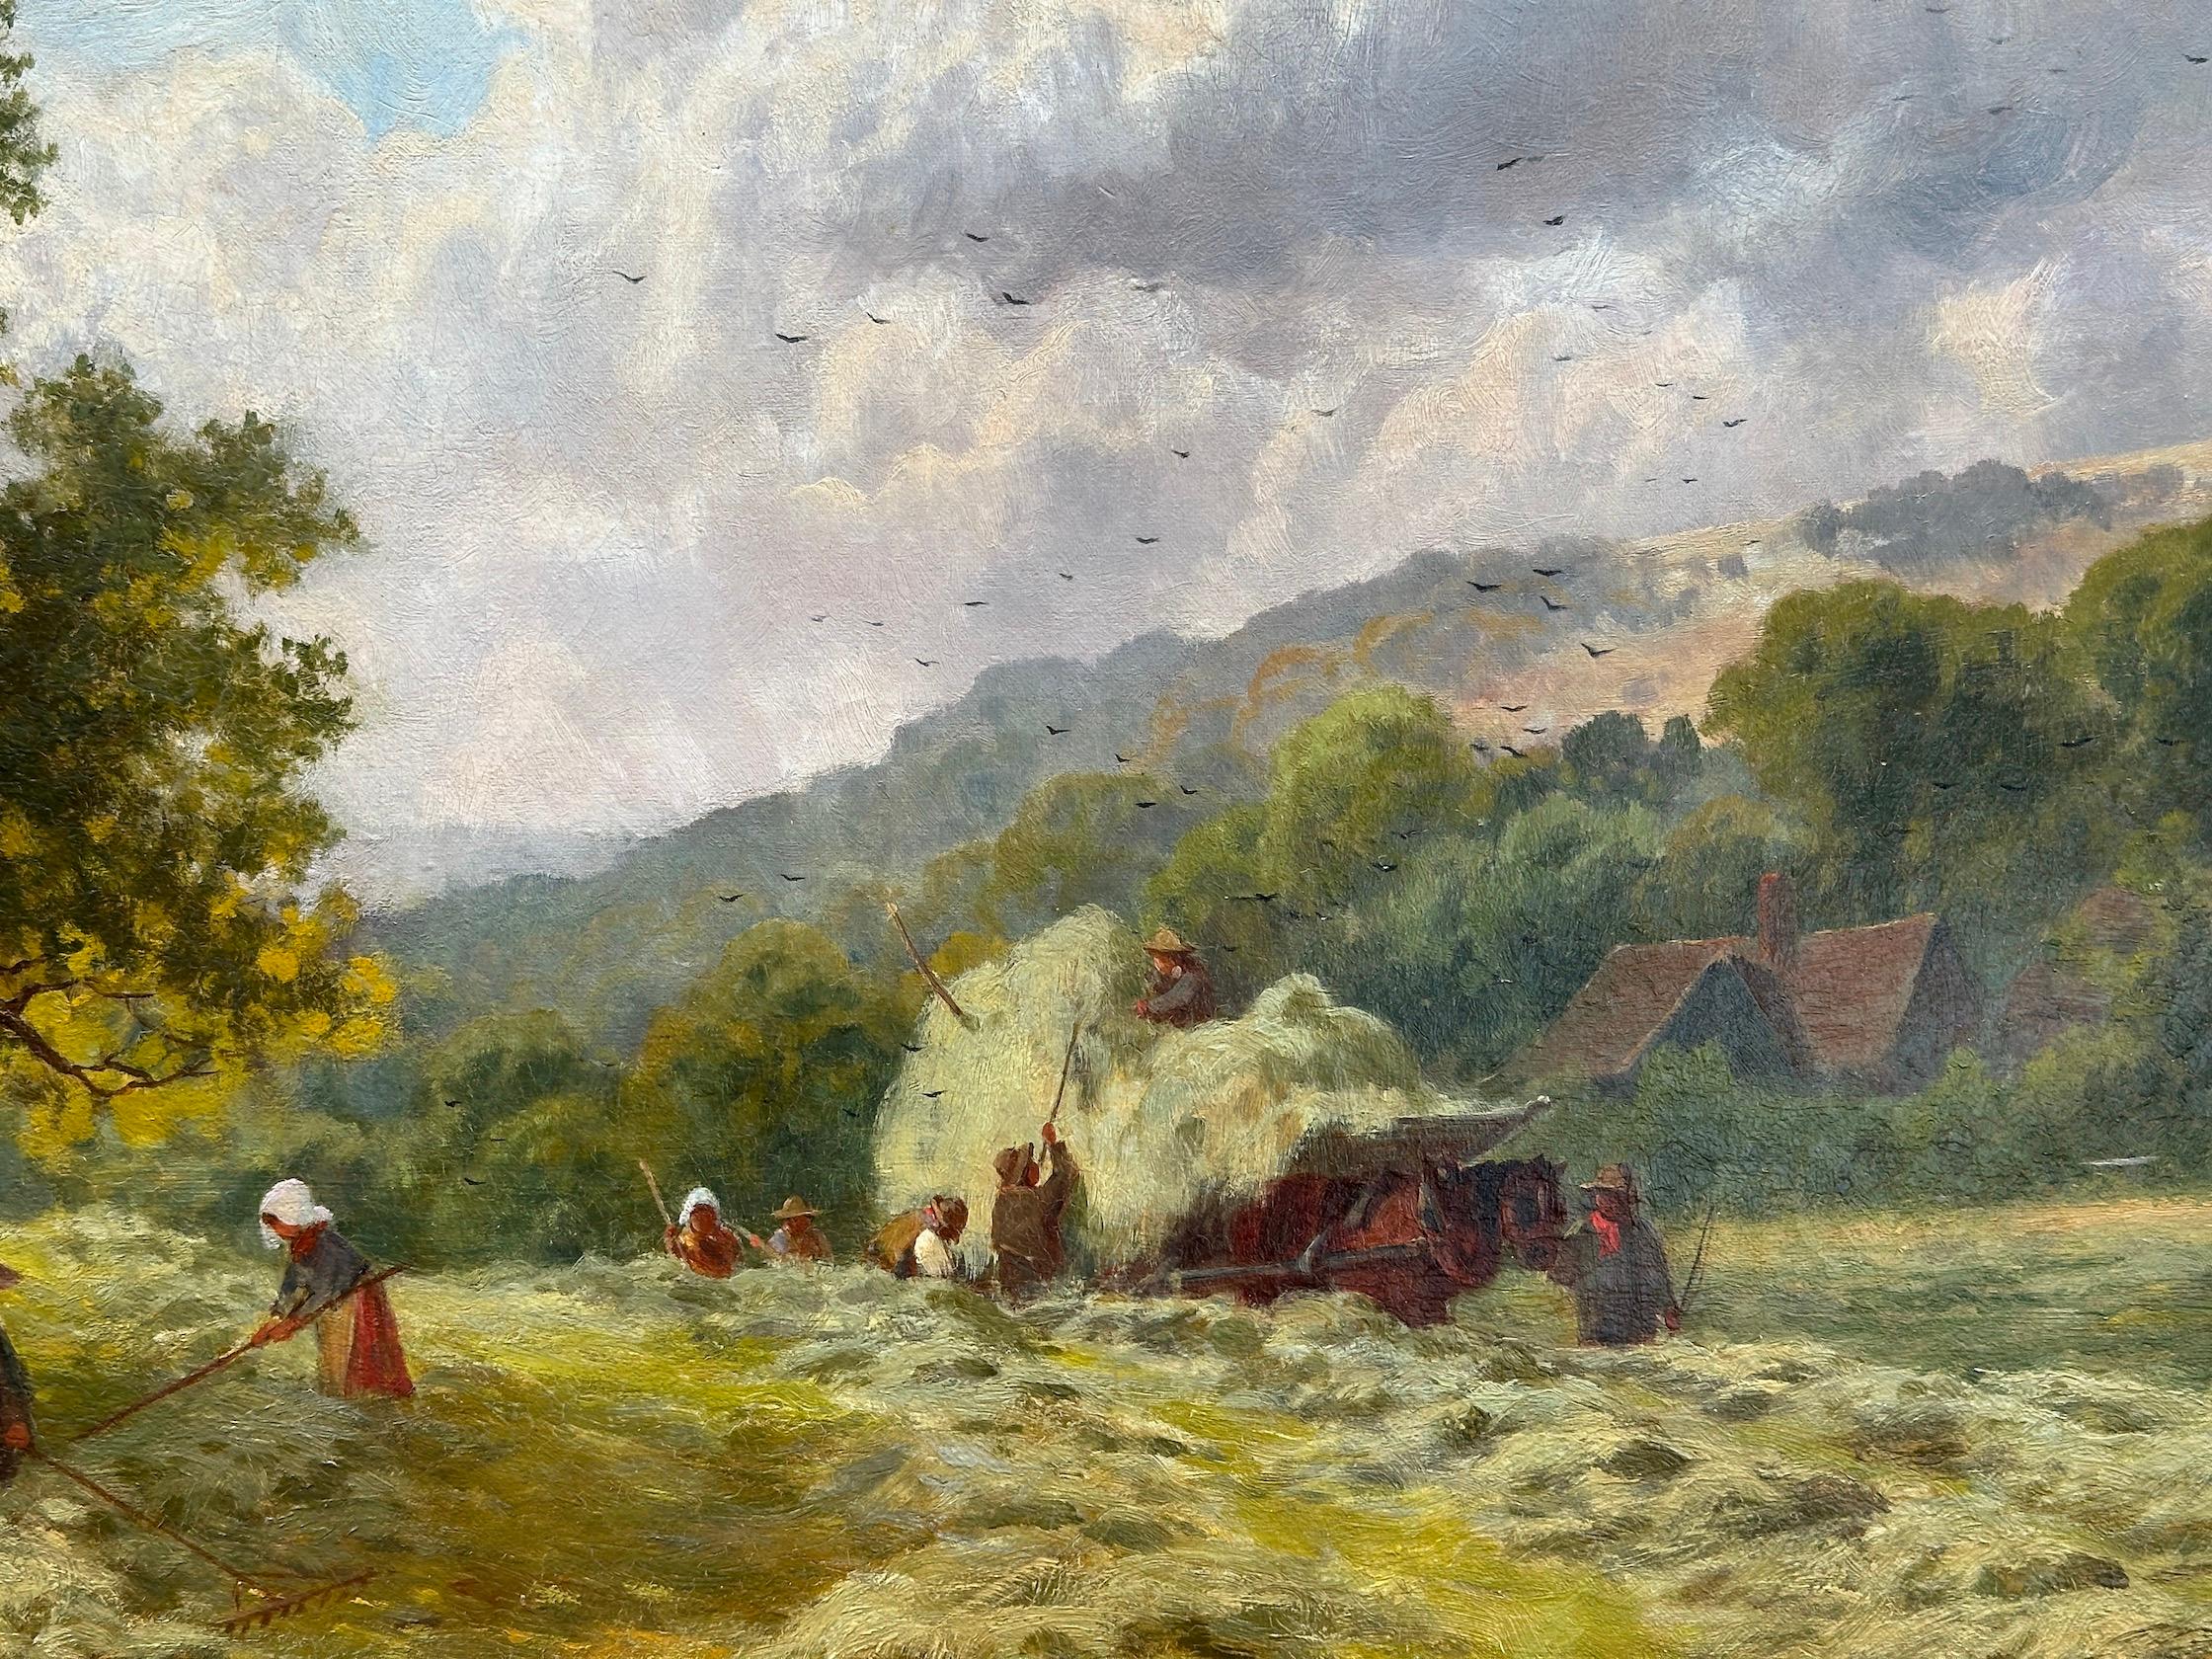 English Antique landscape with farmers harvesting in a field collecting hay - Victorian Painting by John Seymour Adams